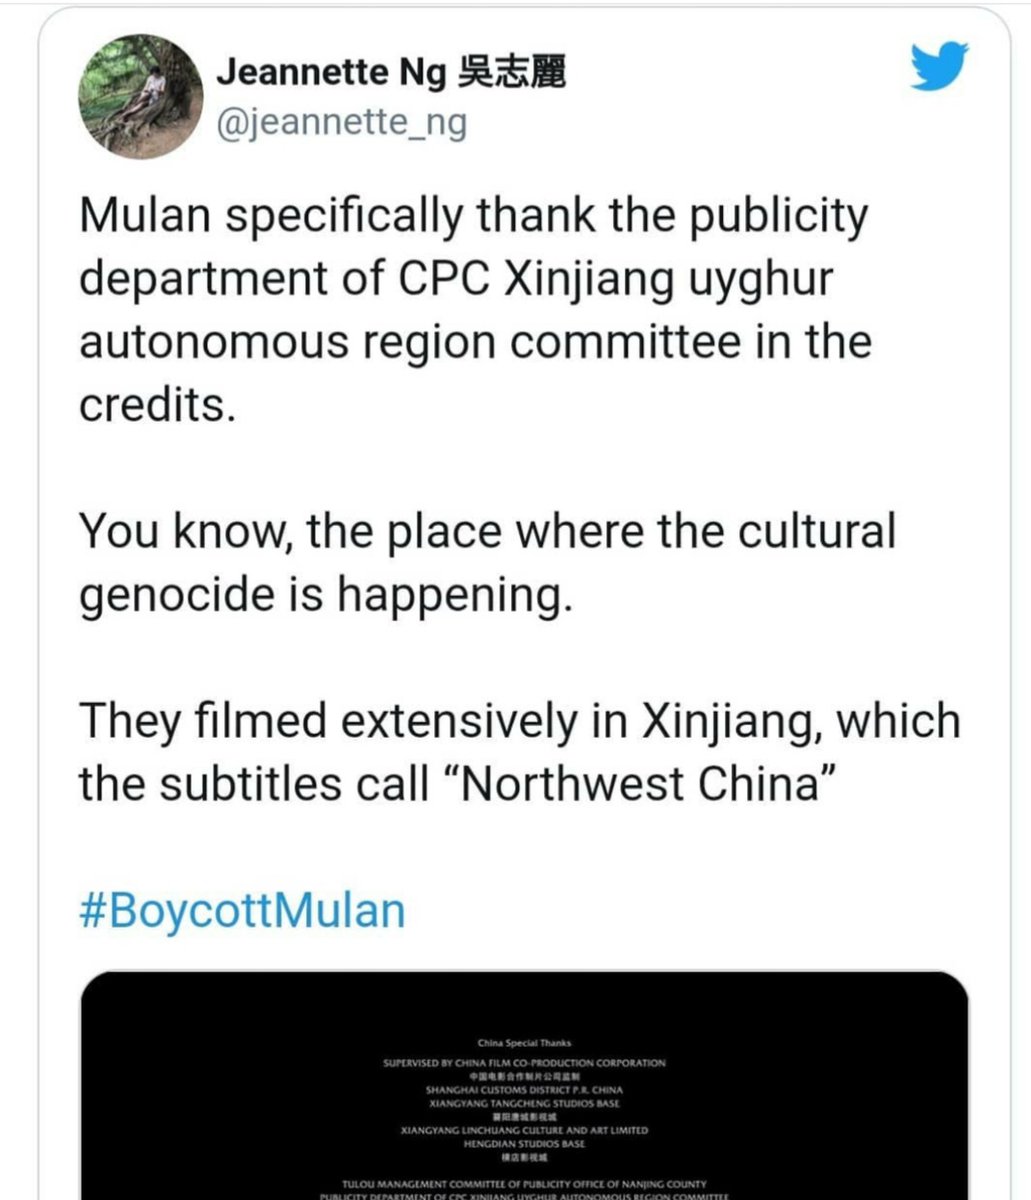 Novelist Jeanette Ng Also Tweeted That In "Mulan," Xinjiang Is Referred To Simply As Western China. #FreeUyghurs